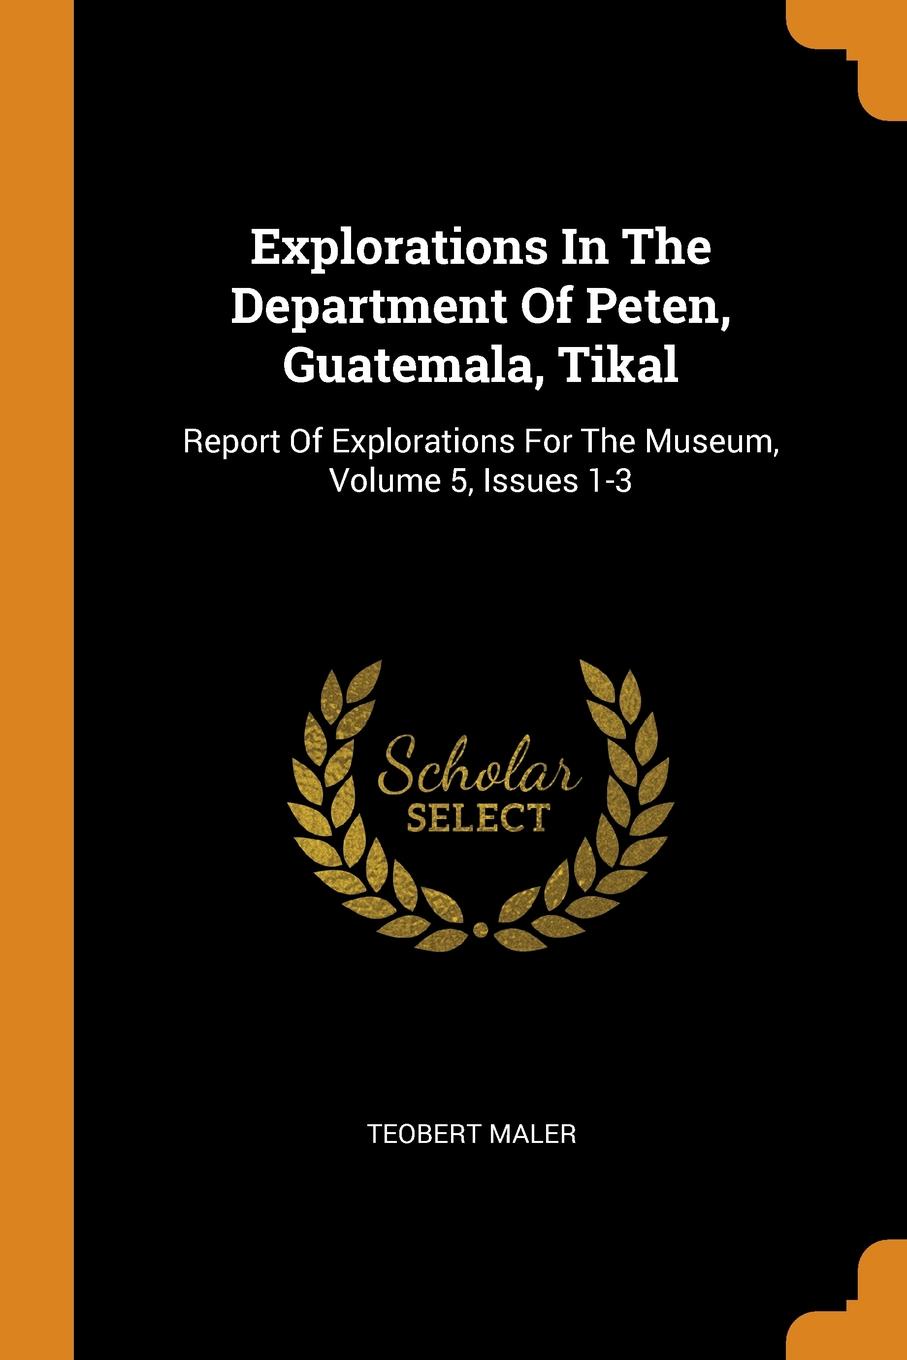 фото Explorations In The Department Of Peten, Guatemala, Tikal. Report Of Explorations For The Museum, Volume 5, Issues 1-3